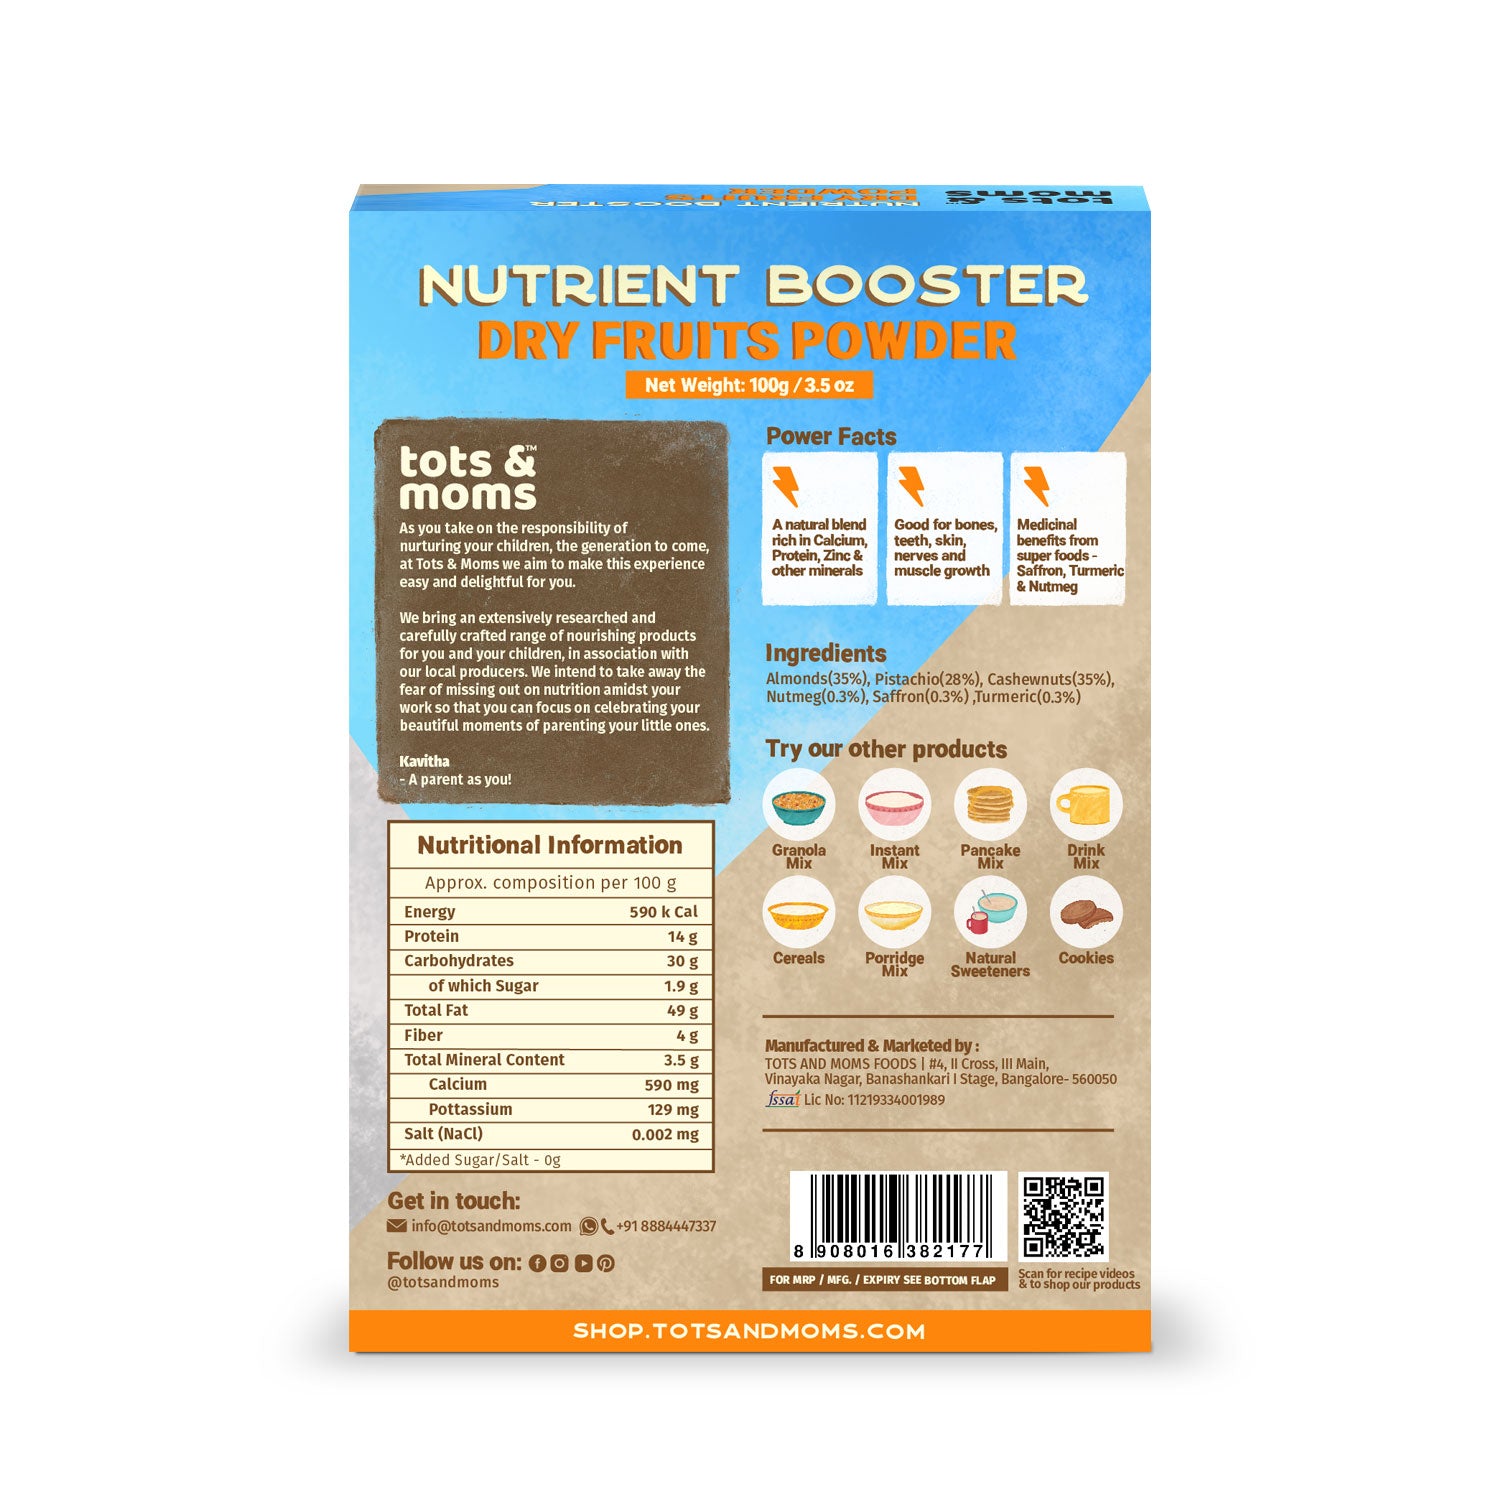 Nutrient Boosters Combo - Pack of 3